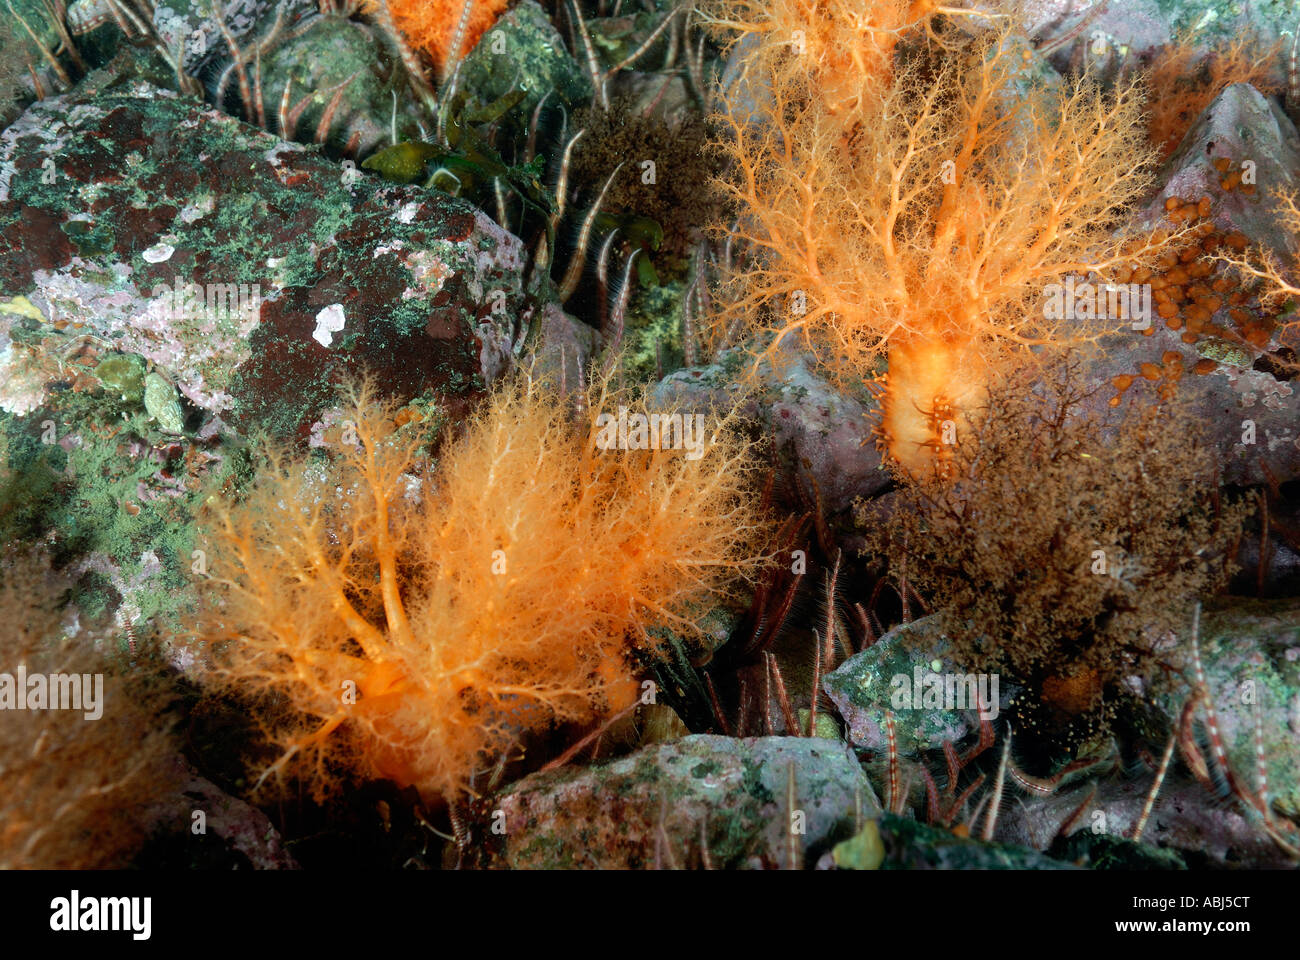 Orange sea cucumber in South of Vancouver Island Stock Photo